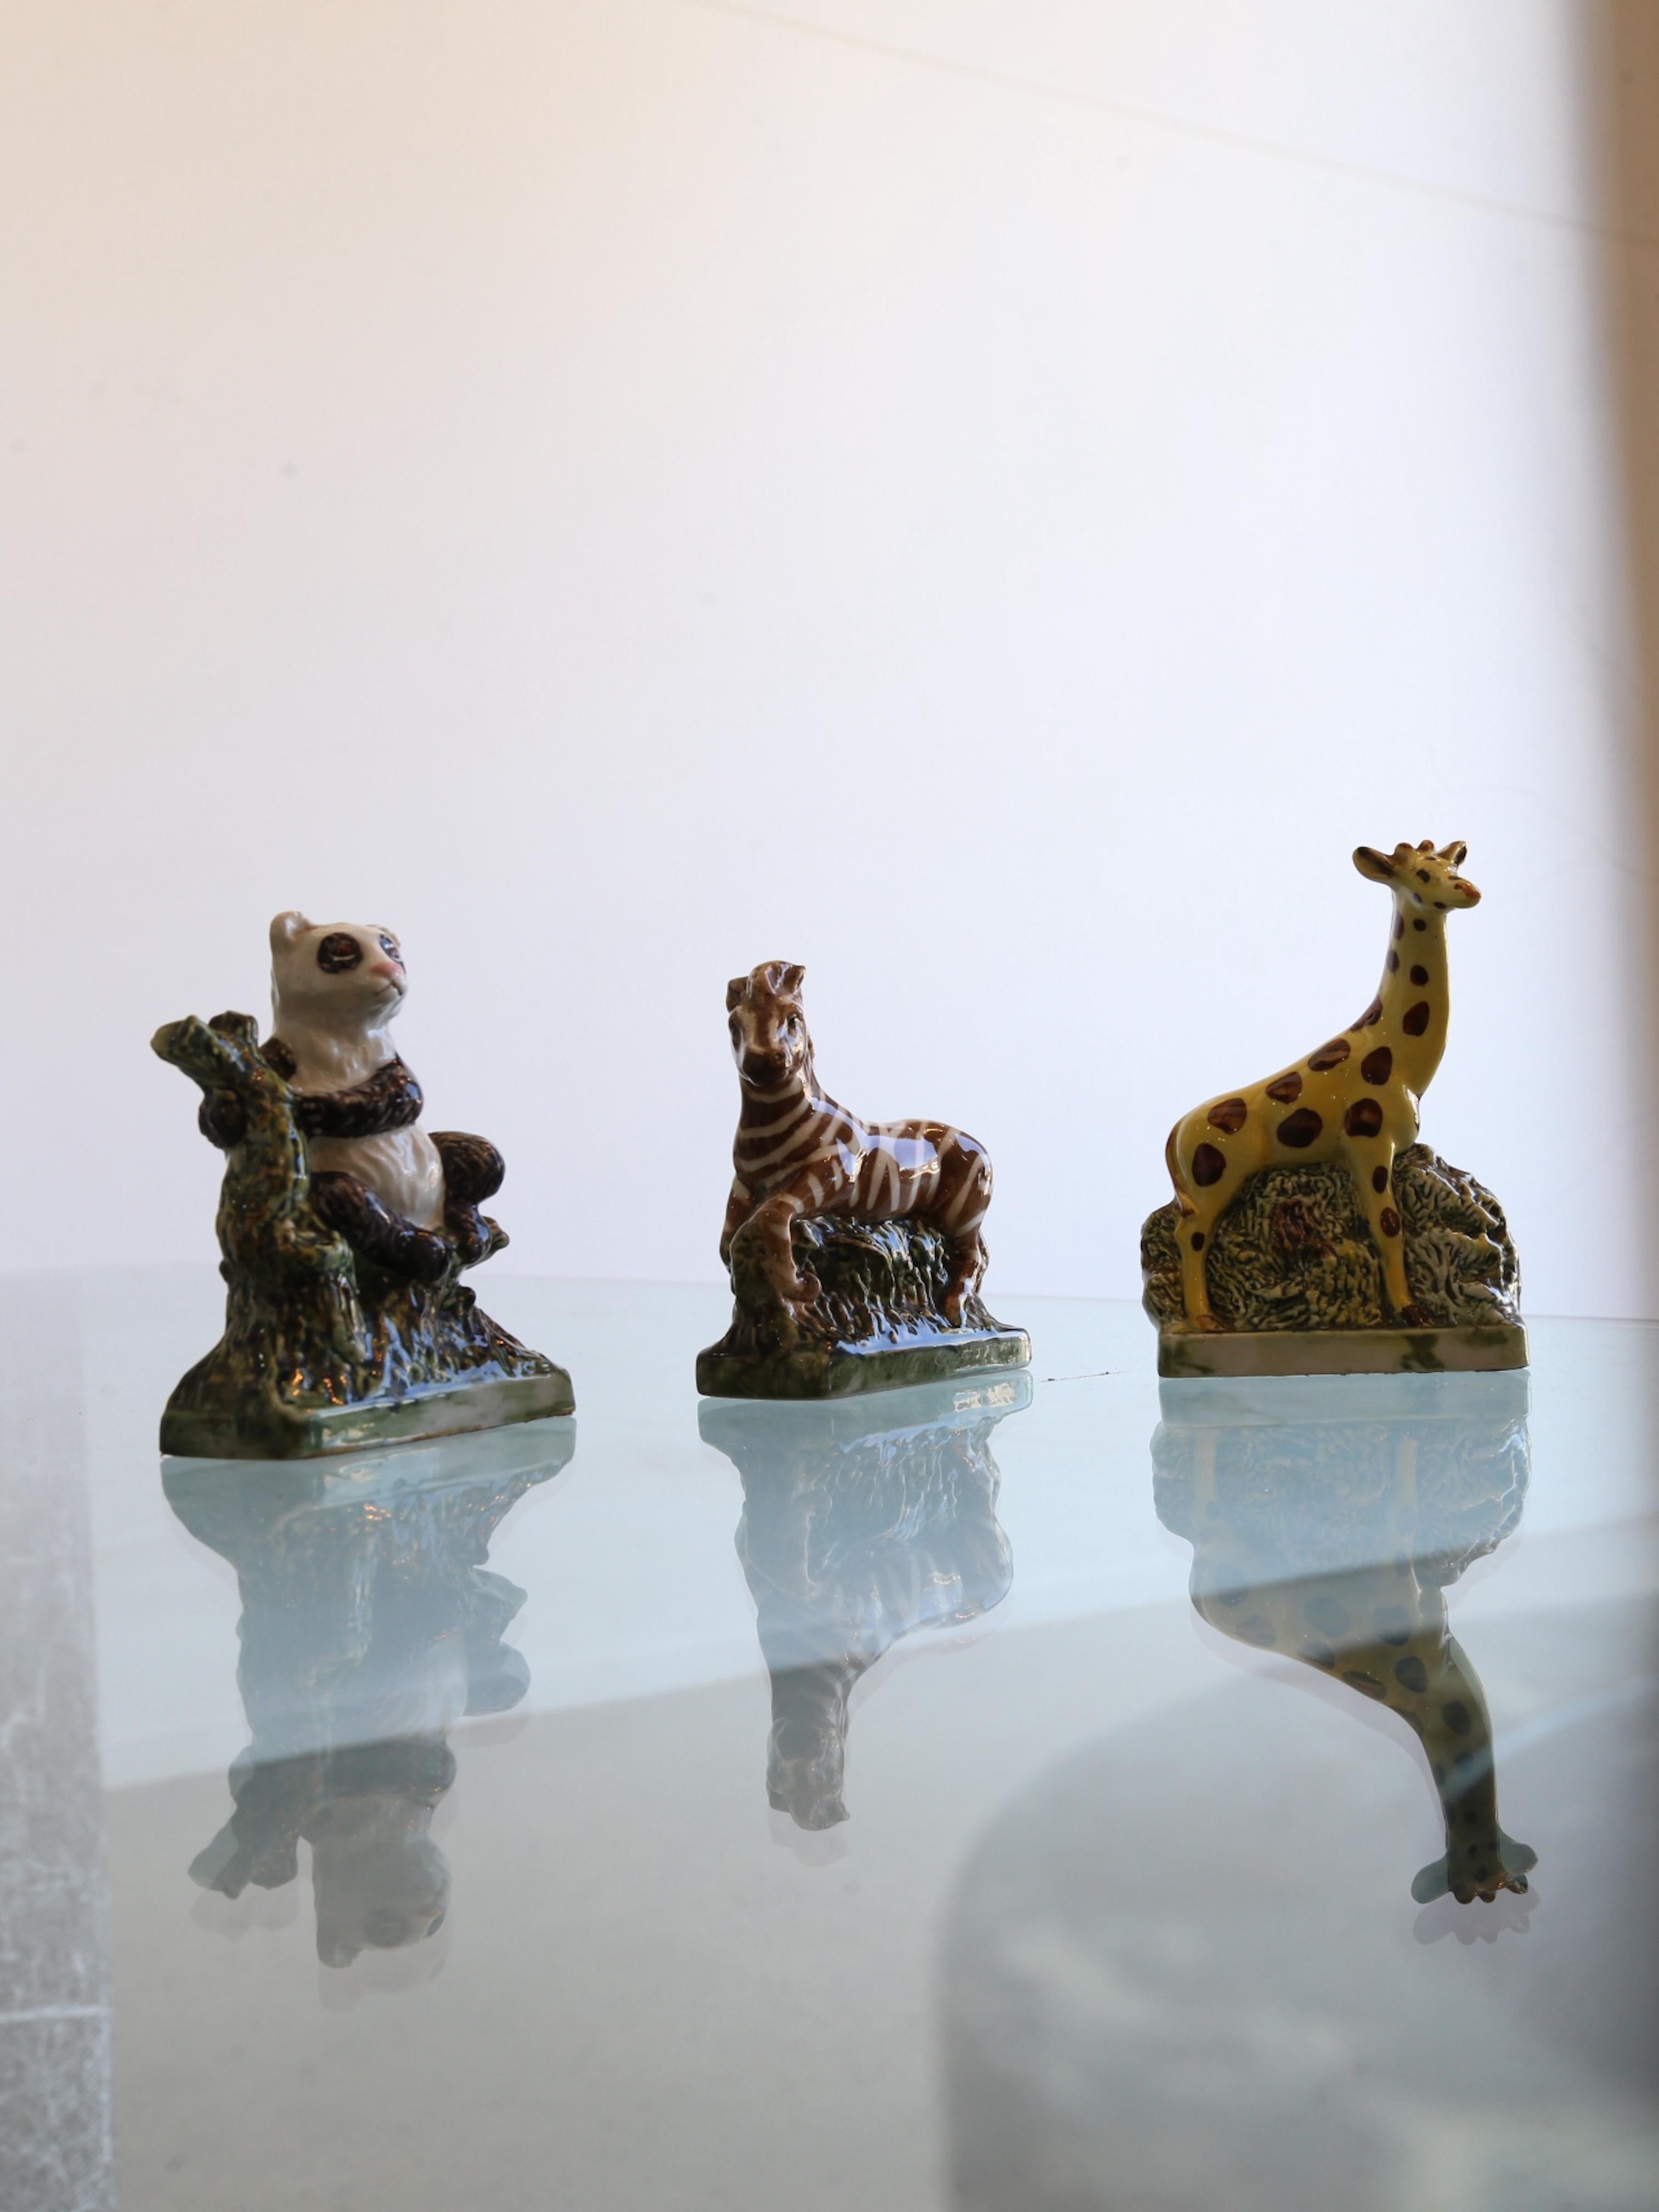 Unique and high collectable set of animal sculpture.
Cantine Duca d'Asti is an Italian ceramic manufacturer that produces a range of ceramics including animal sculptures.The animal sculptures produced by Cantine Duca d'Asti are highly collectible